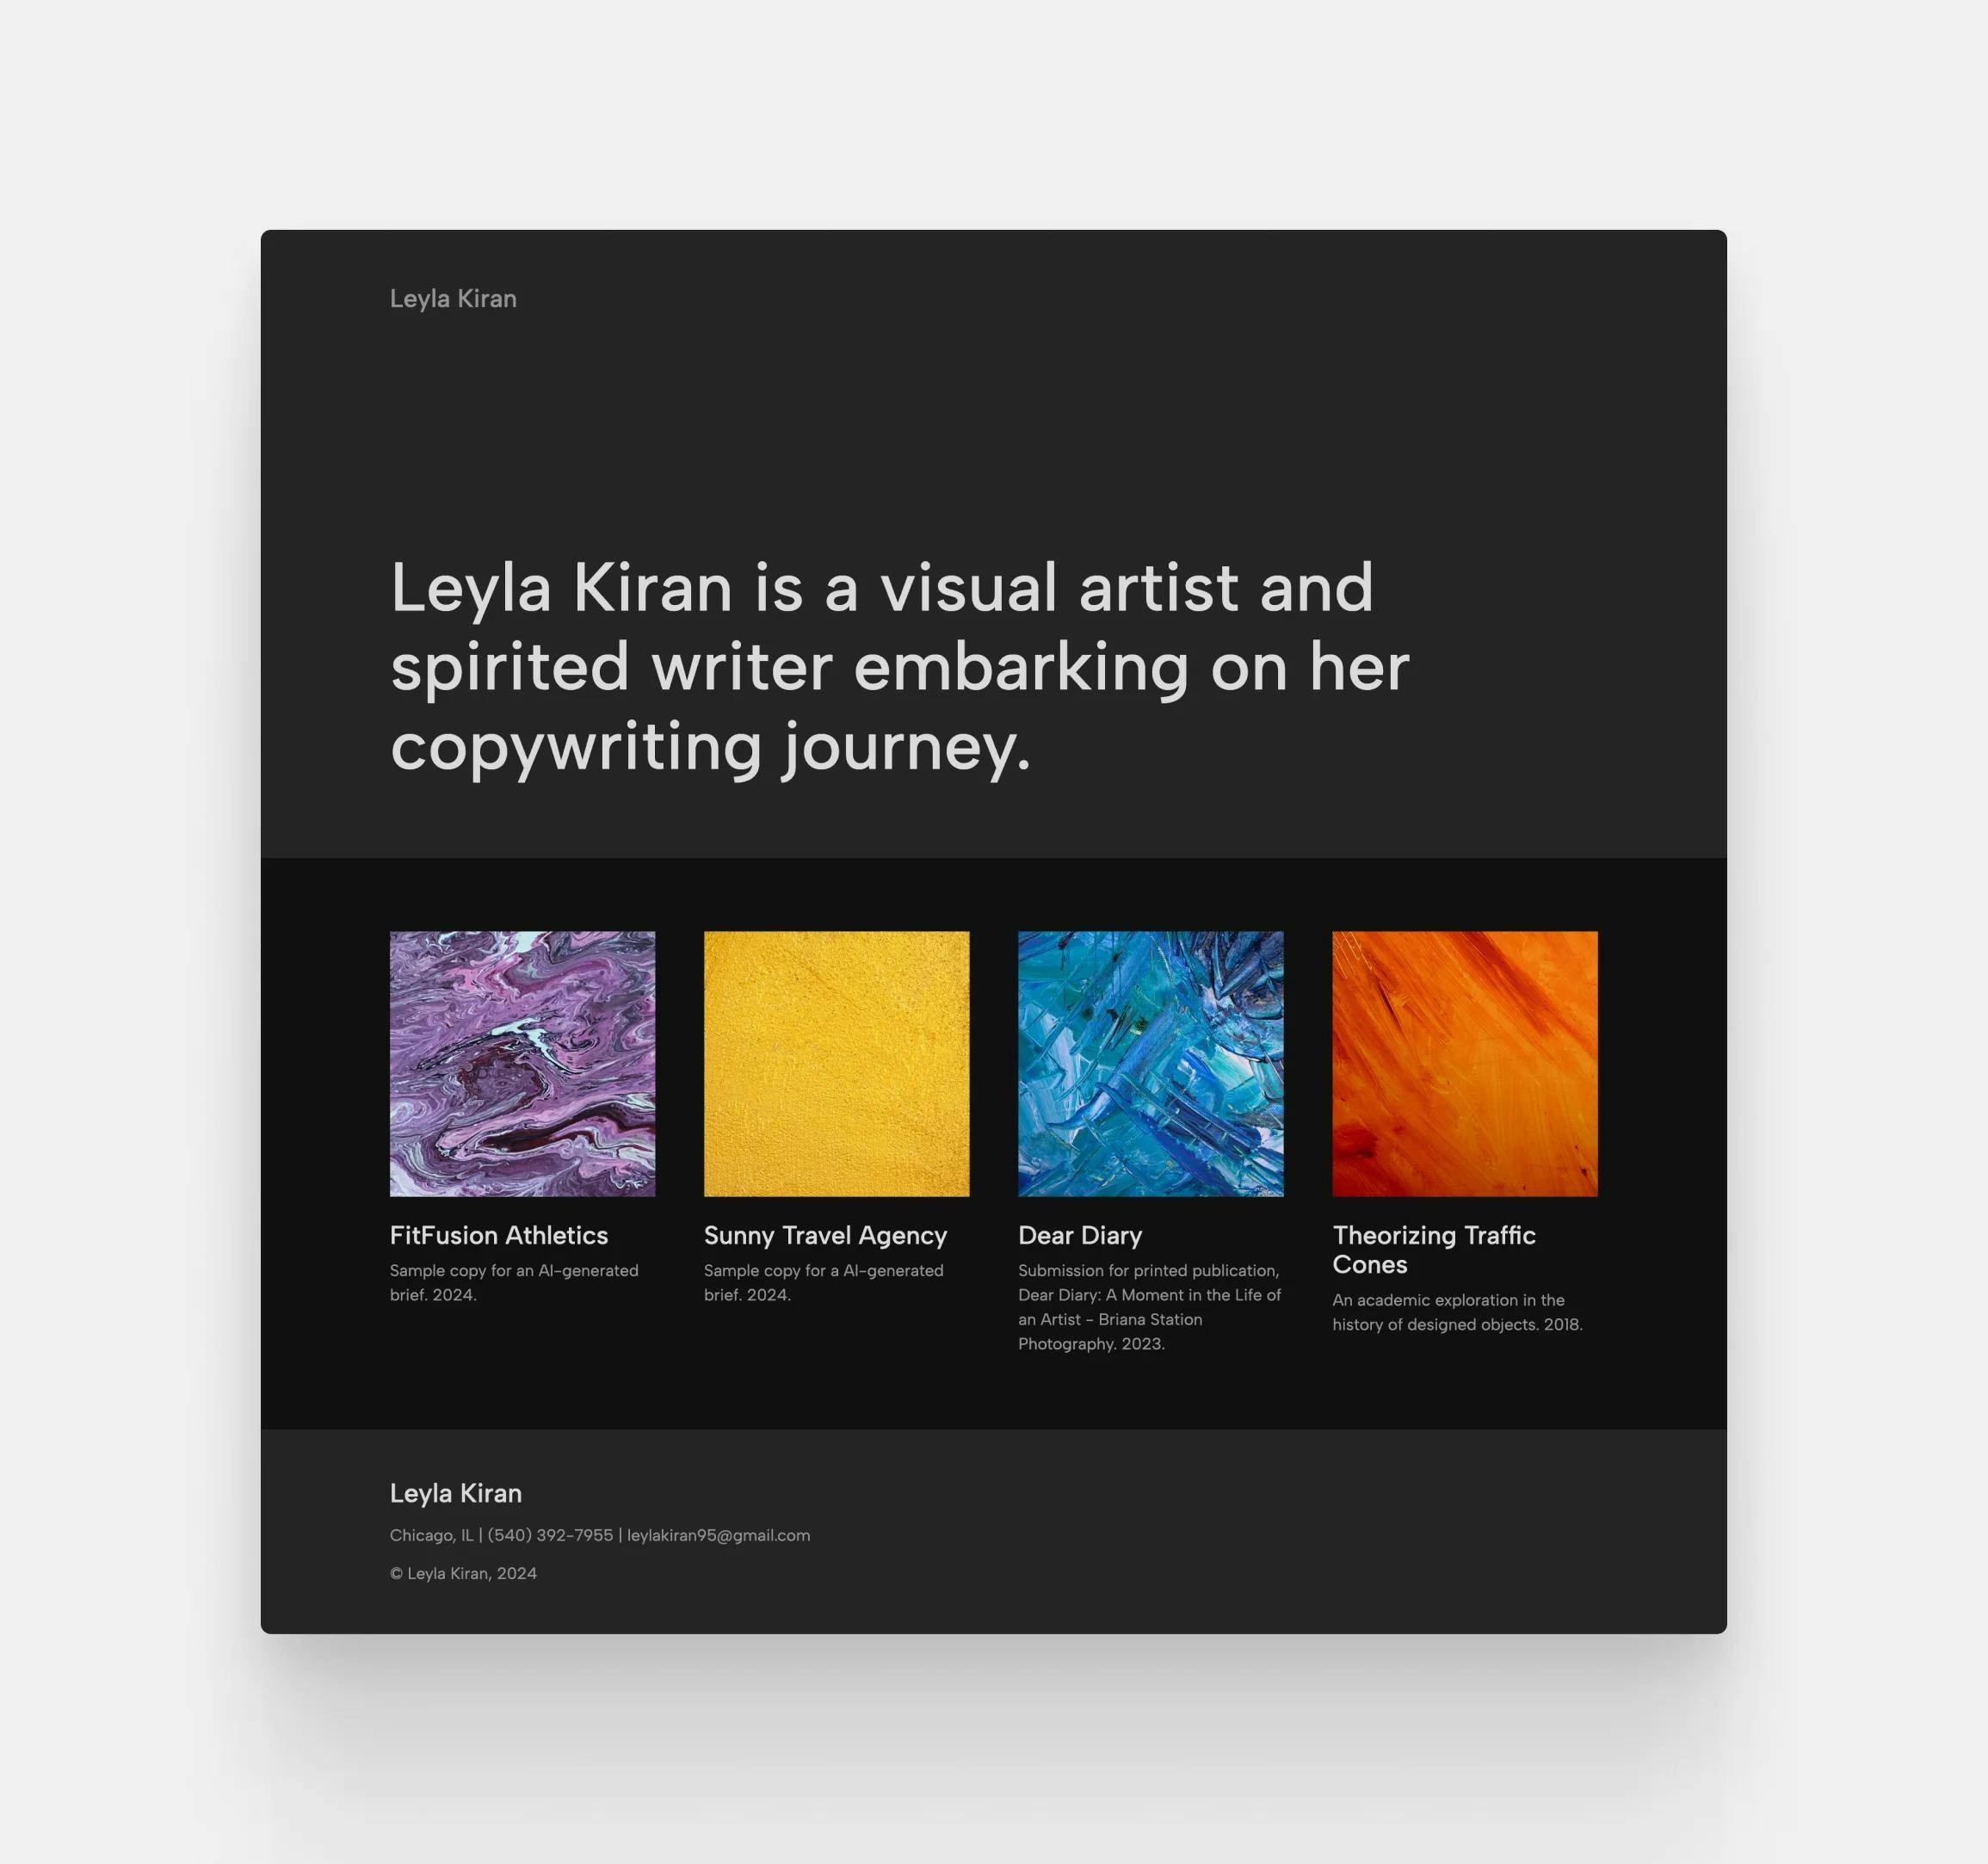 Leyla Kiran's website made with Copyfolio, showing her journey as a visual artist and writer to becoming a copywriter